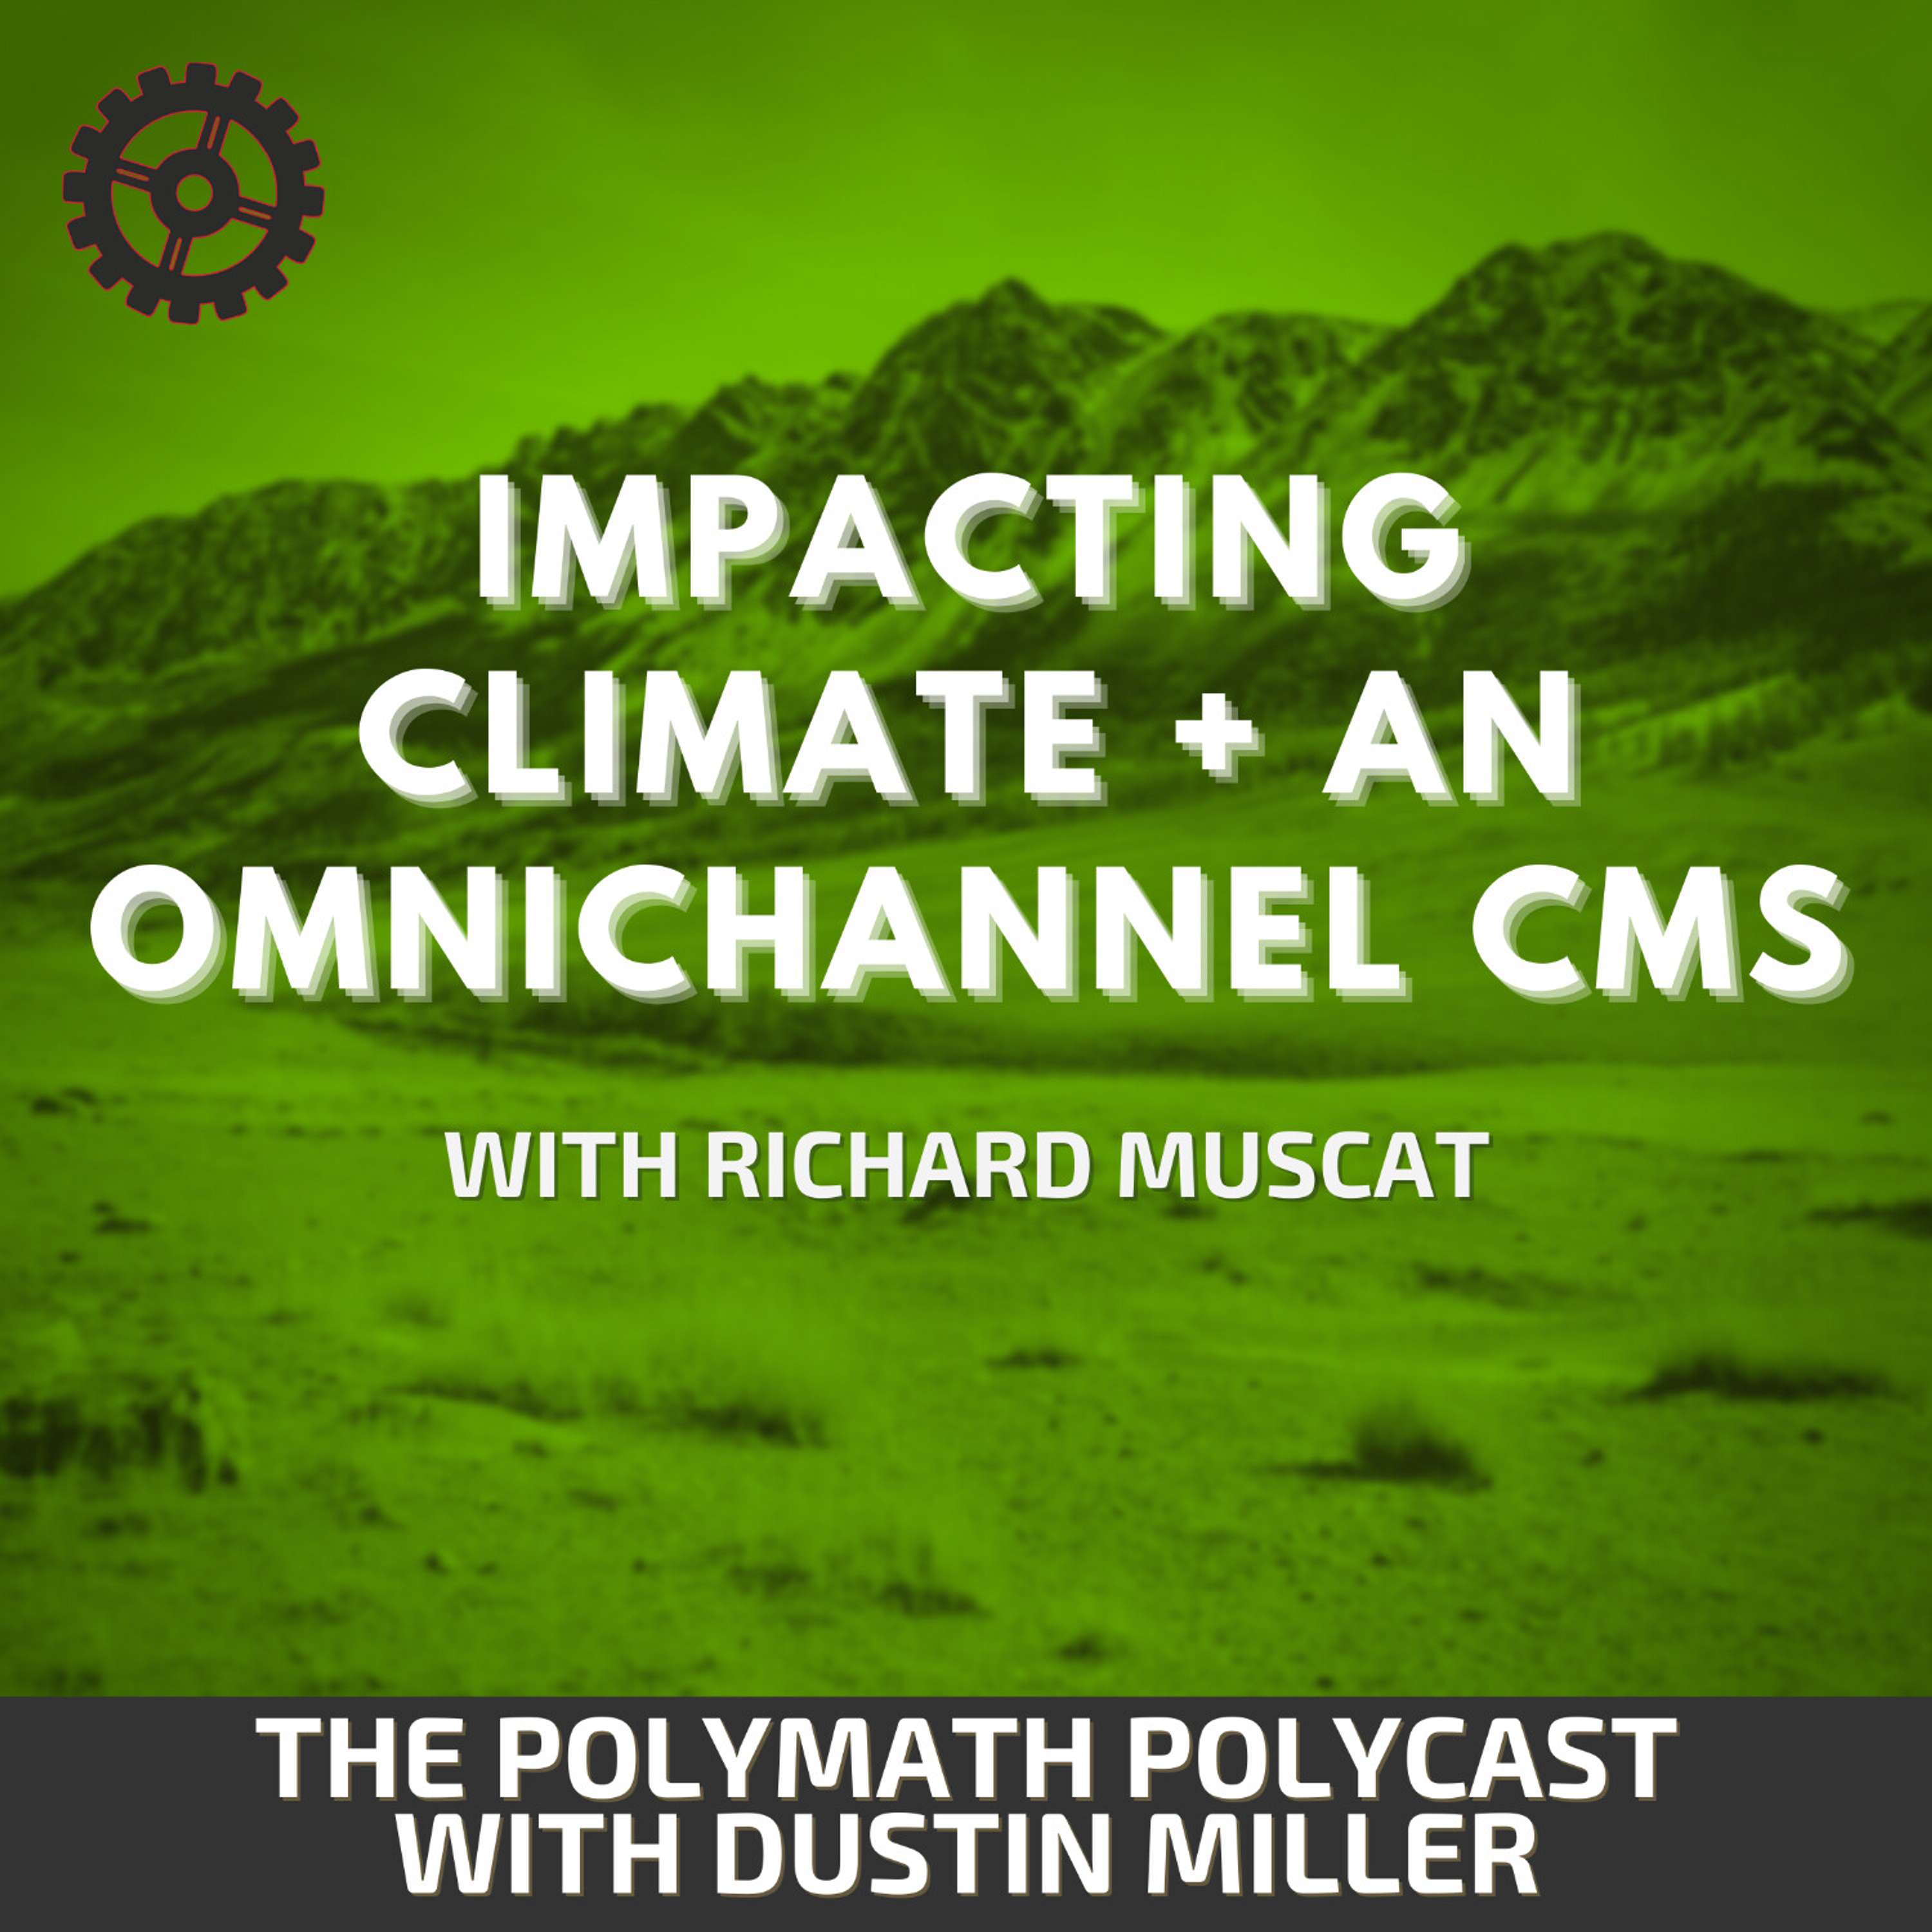 Impacting climate + an OmniChannel CMS with Richard Muscat [Interview]